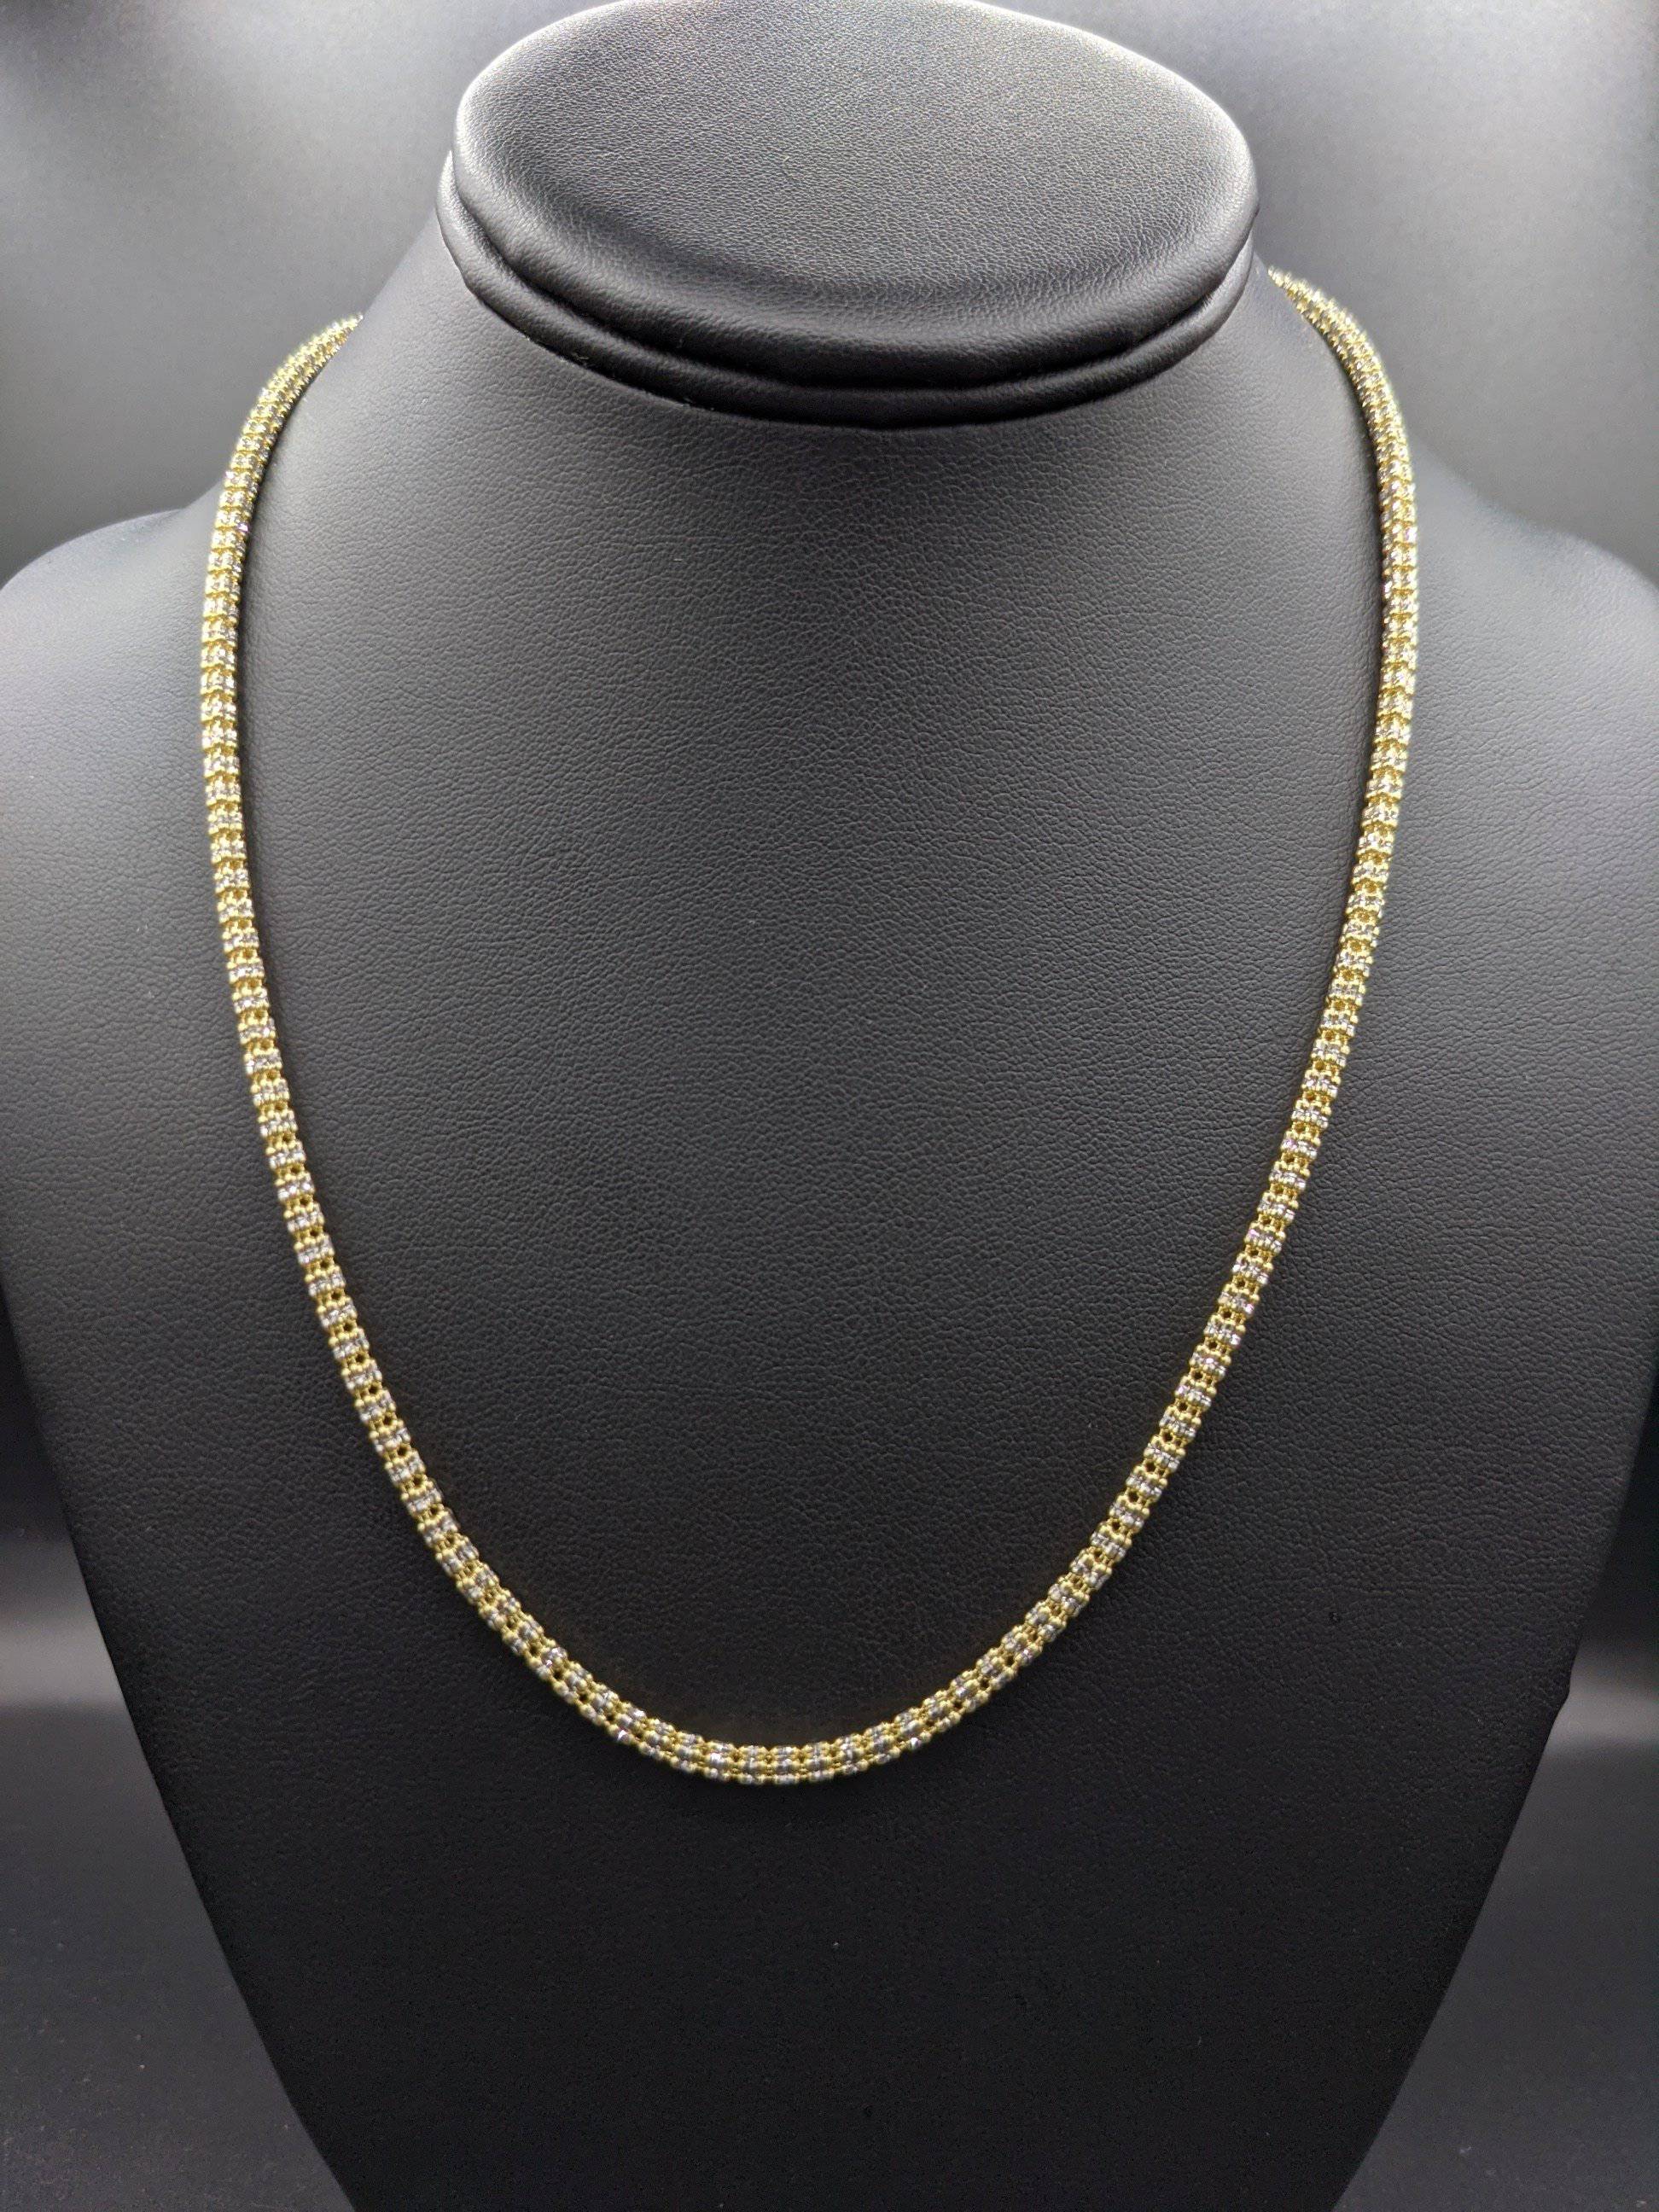 14k Moon Ice Chain by Gold Drip ™ - Gold Drip Jewelry